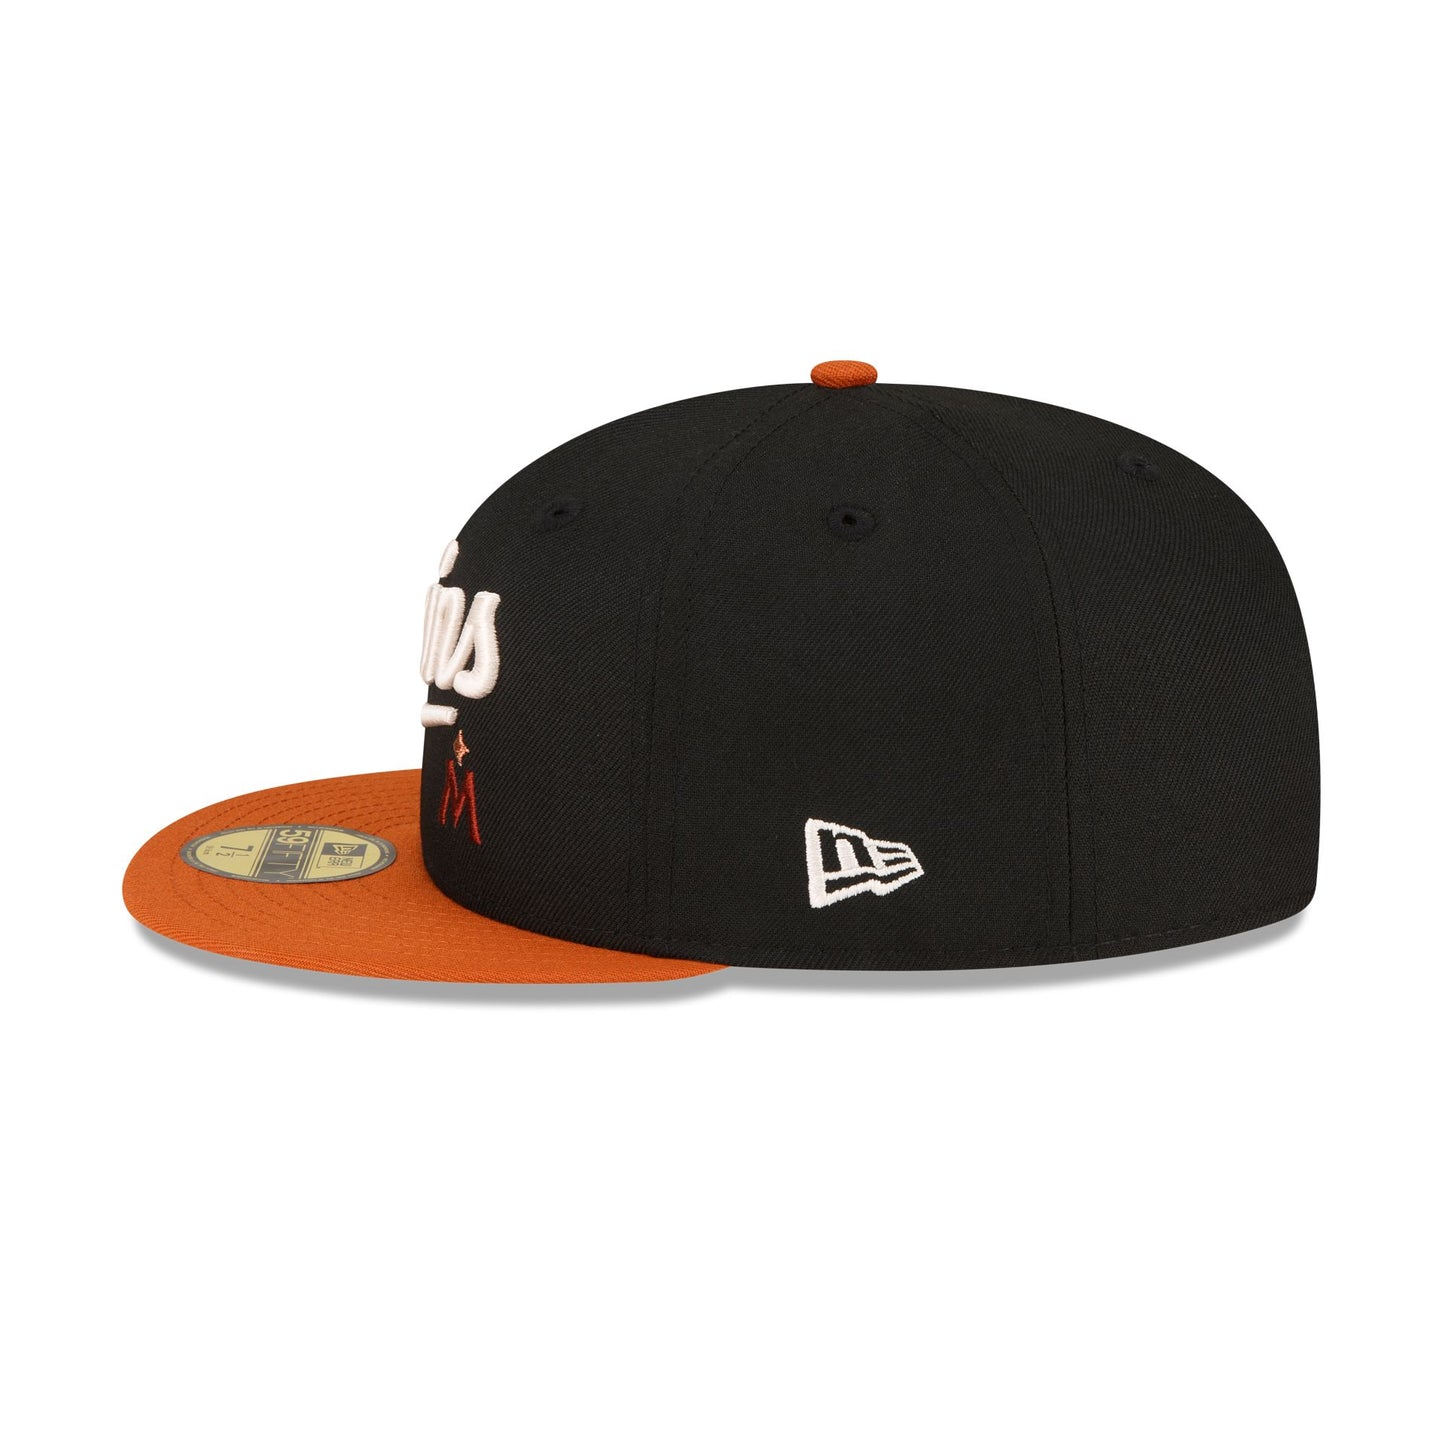 Just Caps Rust Orange St. Louis Cardinals 59FIFTY Fitted Hat, White - Size: 7, MLB by New Era